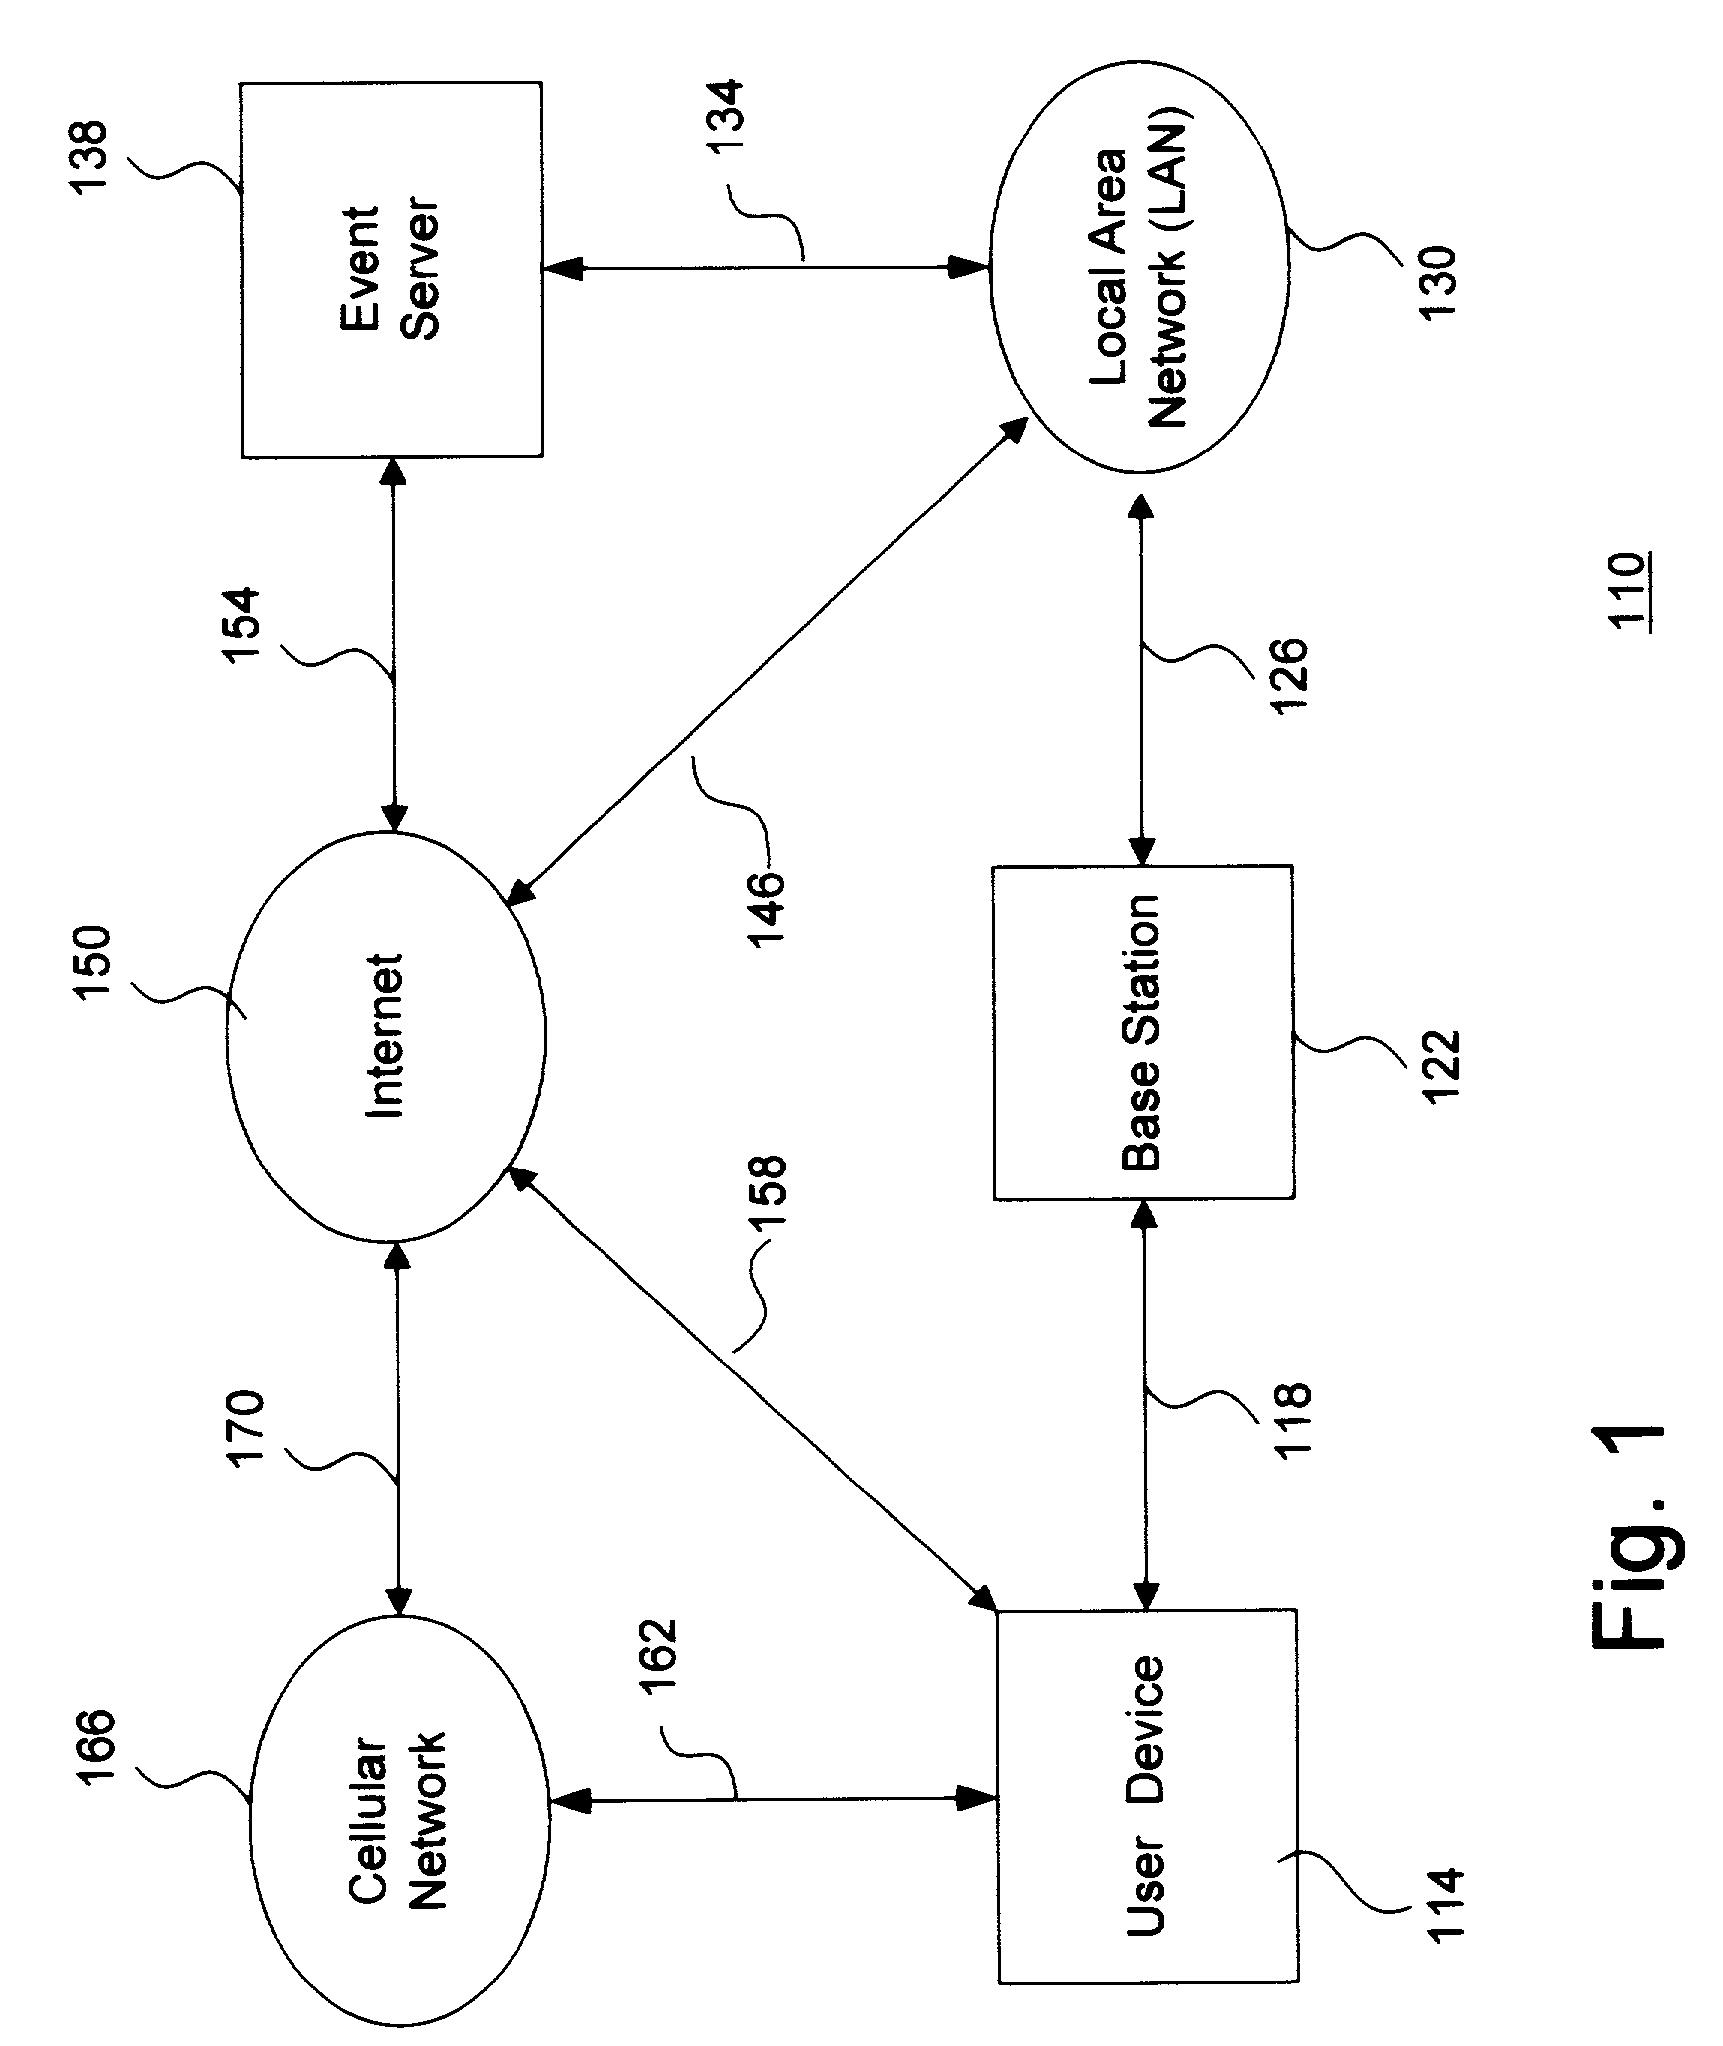 System and method for effectively providing user information from a user device